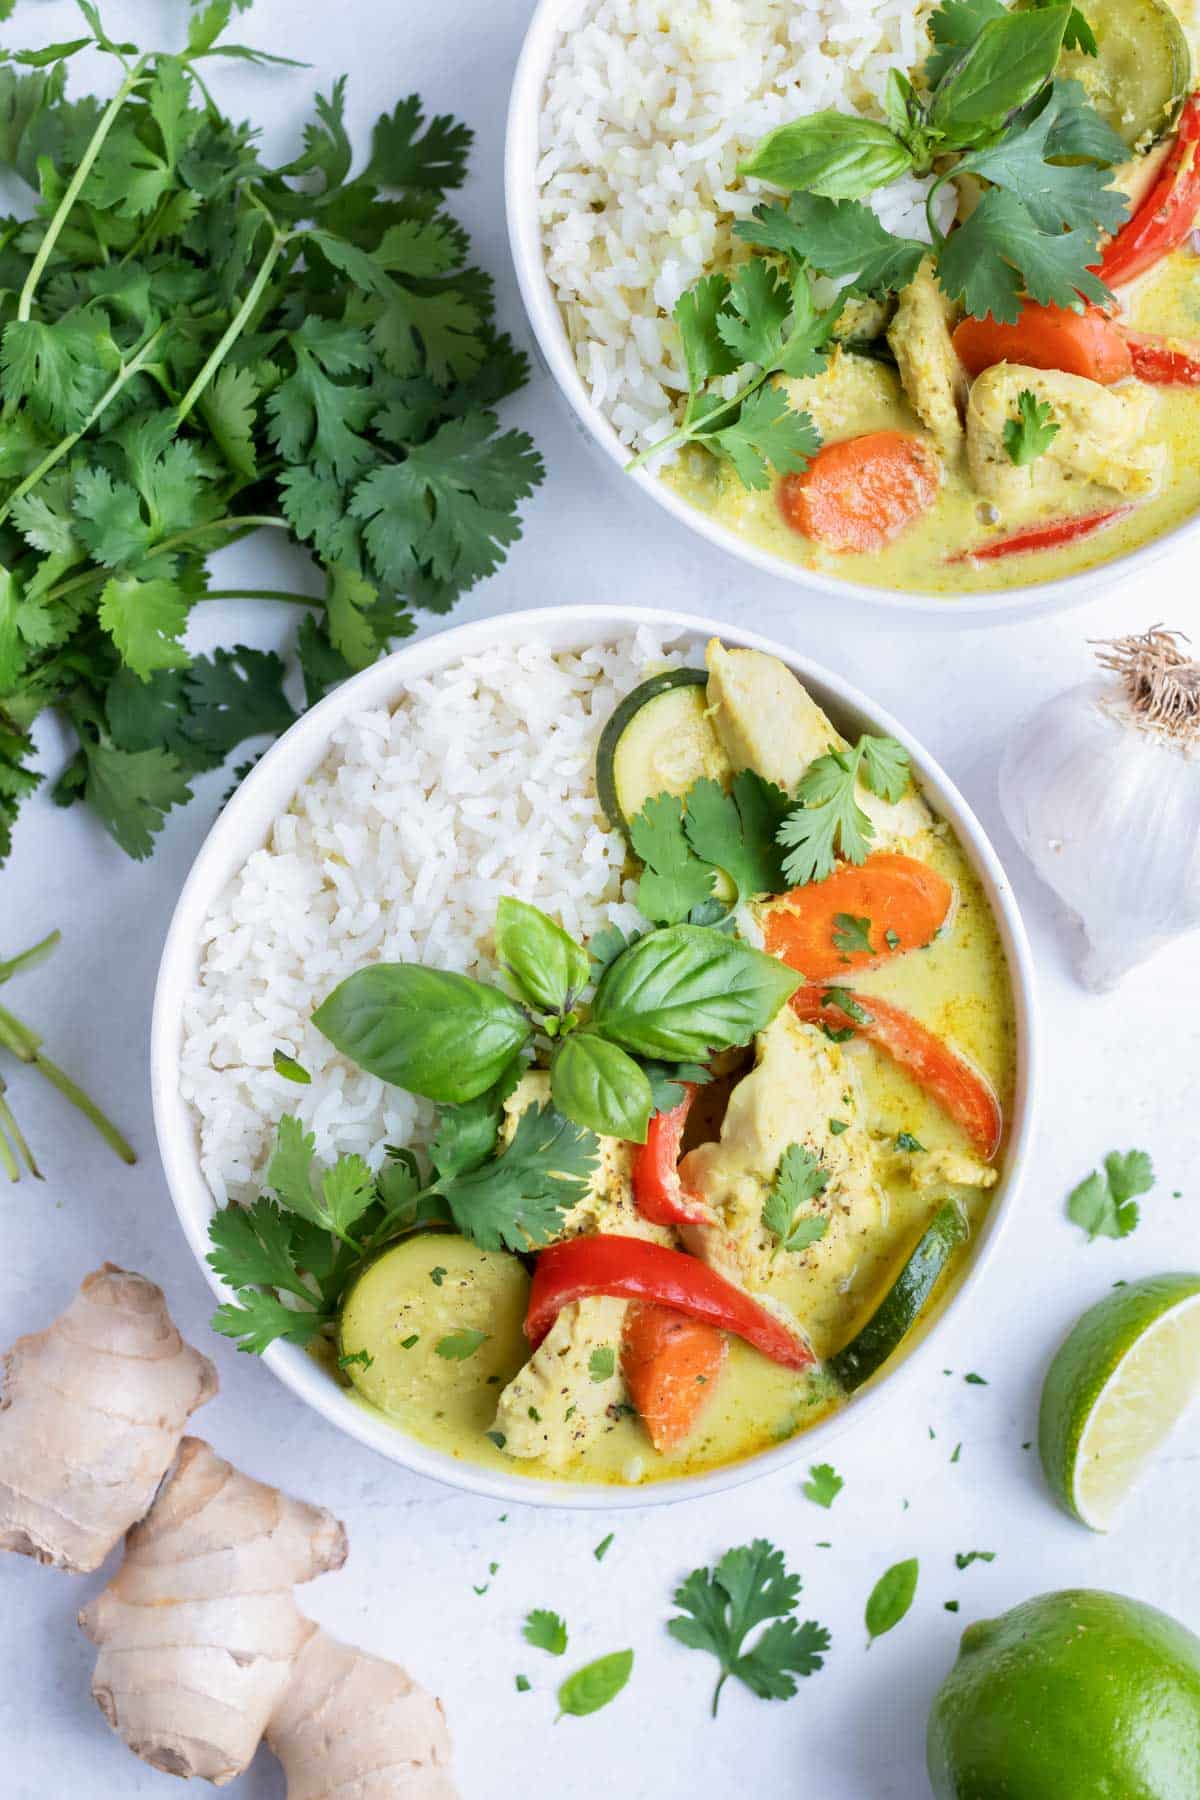 Fresh ingredients are used in this homemade Thai green chicken curry.